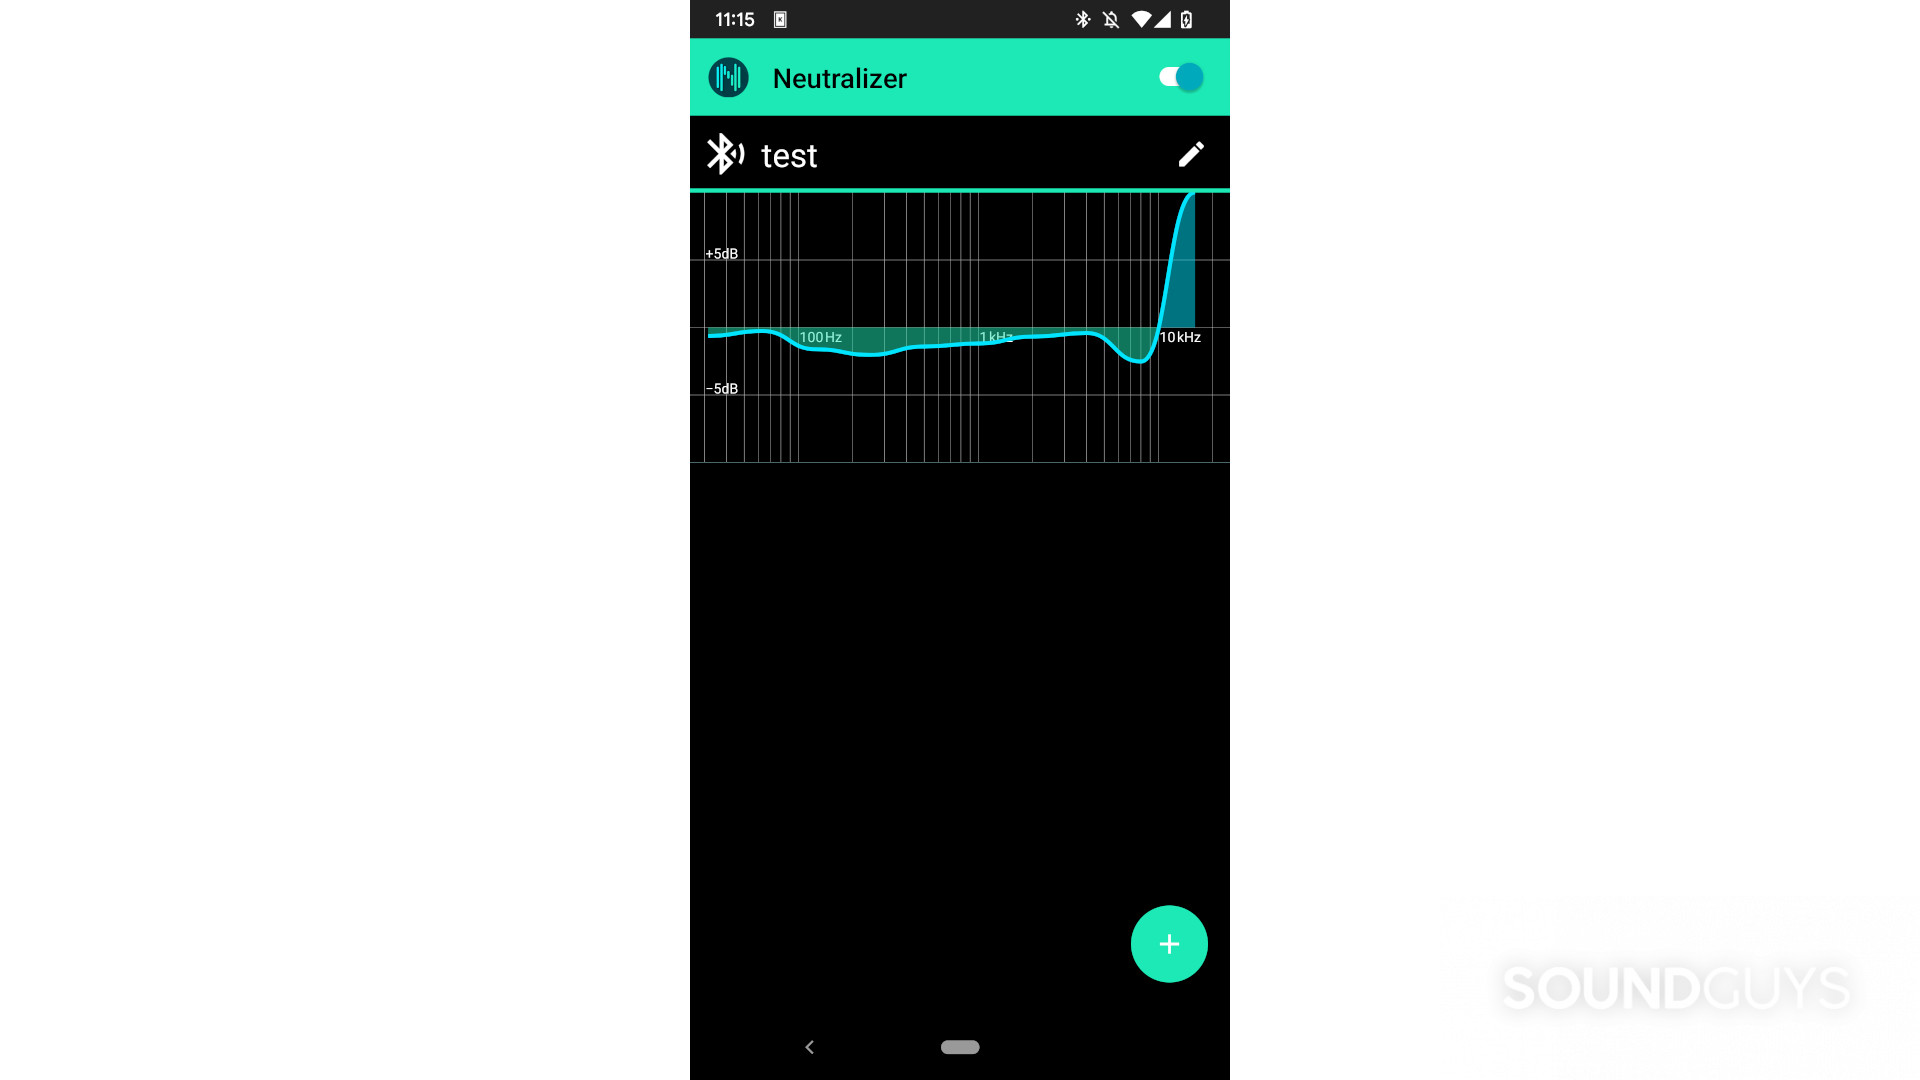 A screenshot of the Neutralizer app showing an EQ curve. The app is black with turquise being used for the graph, buttons, and app header.